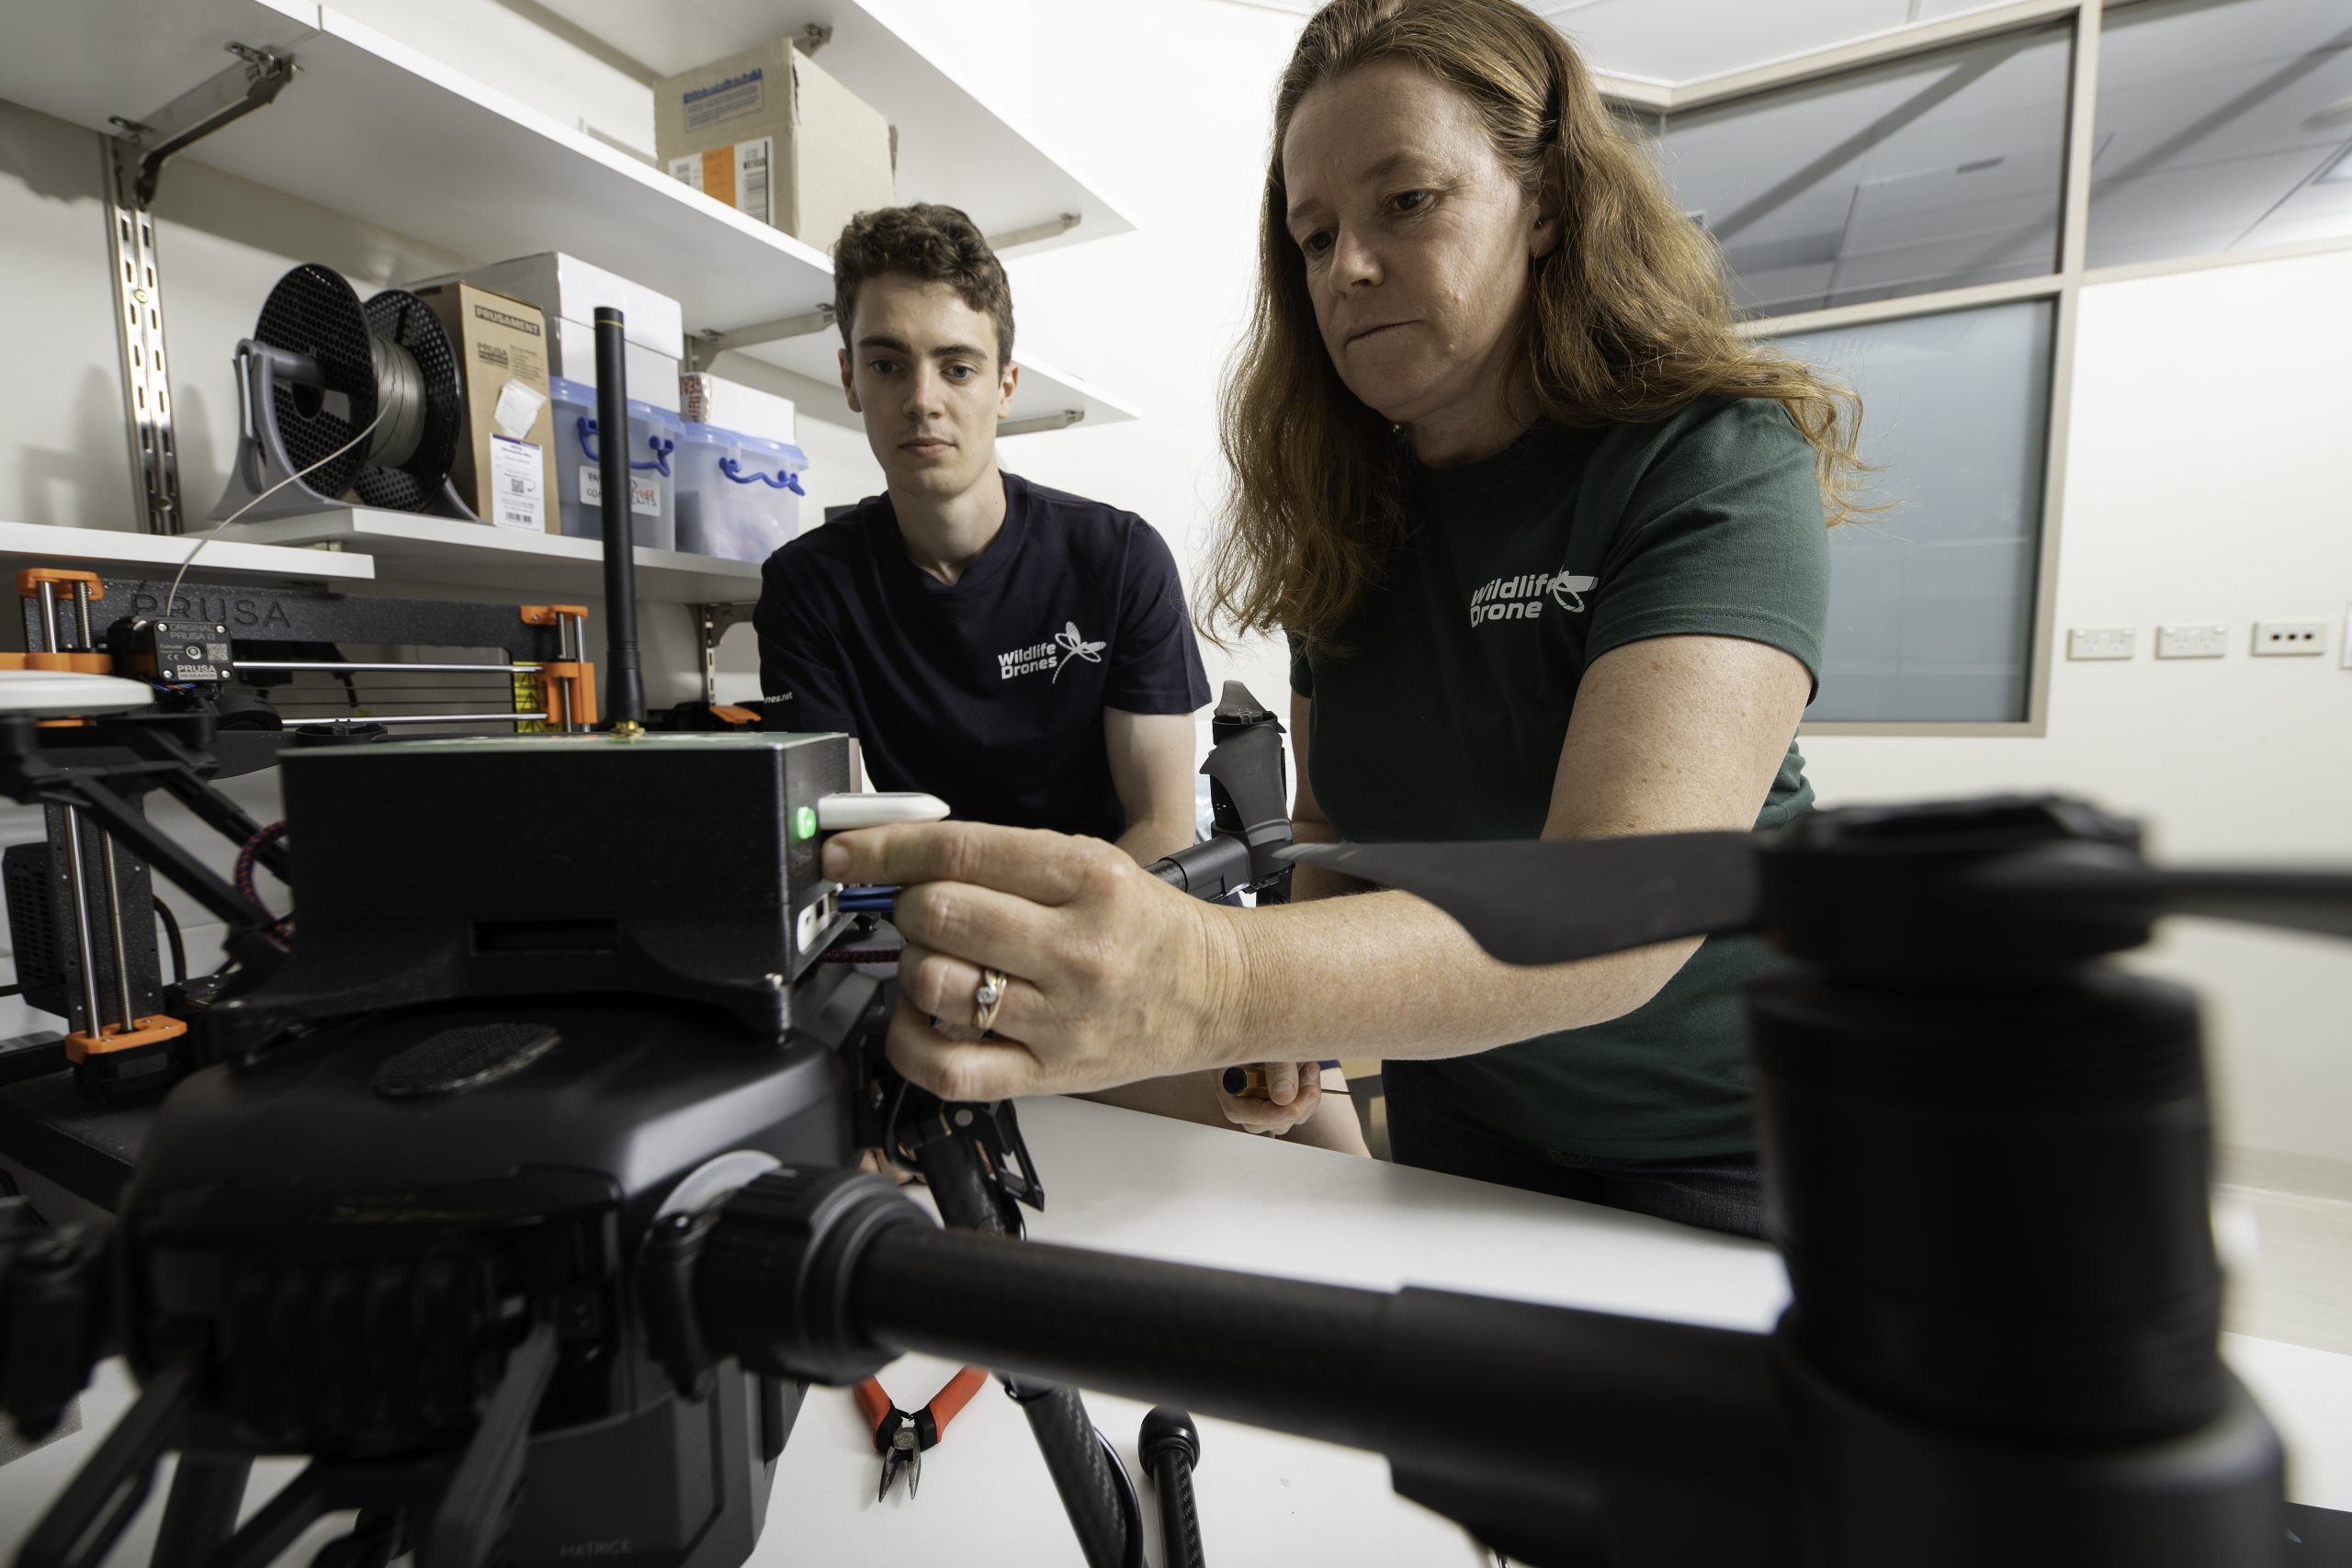 Debbie Saunders and Liam Kennedy setting up the drone in the lab.